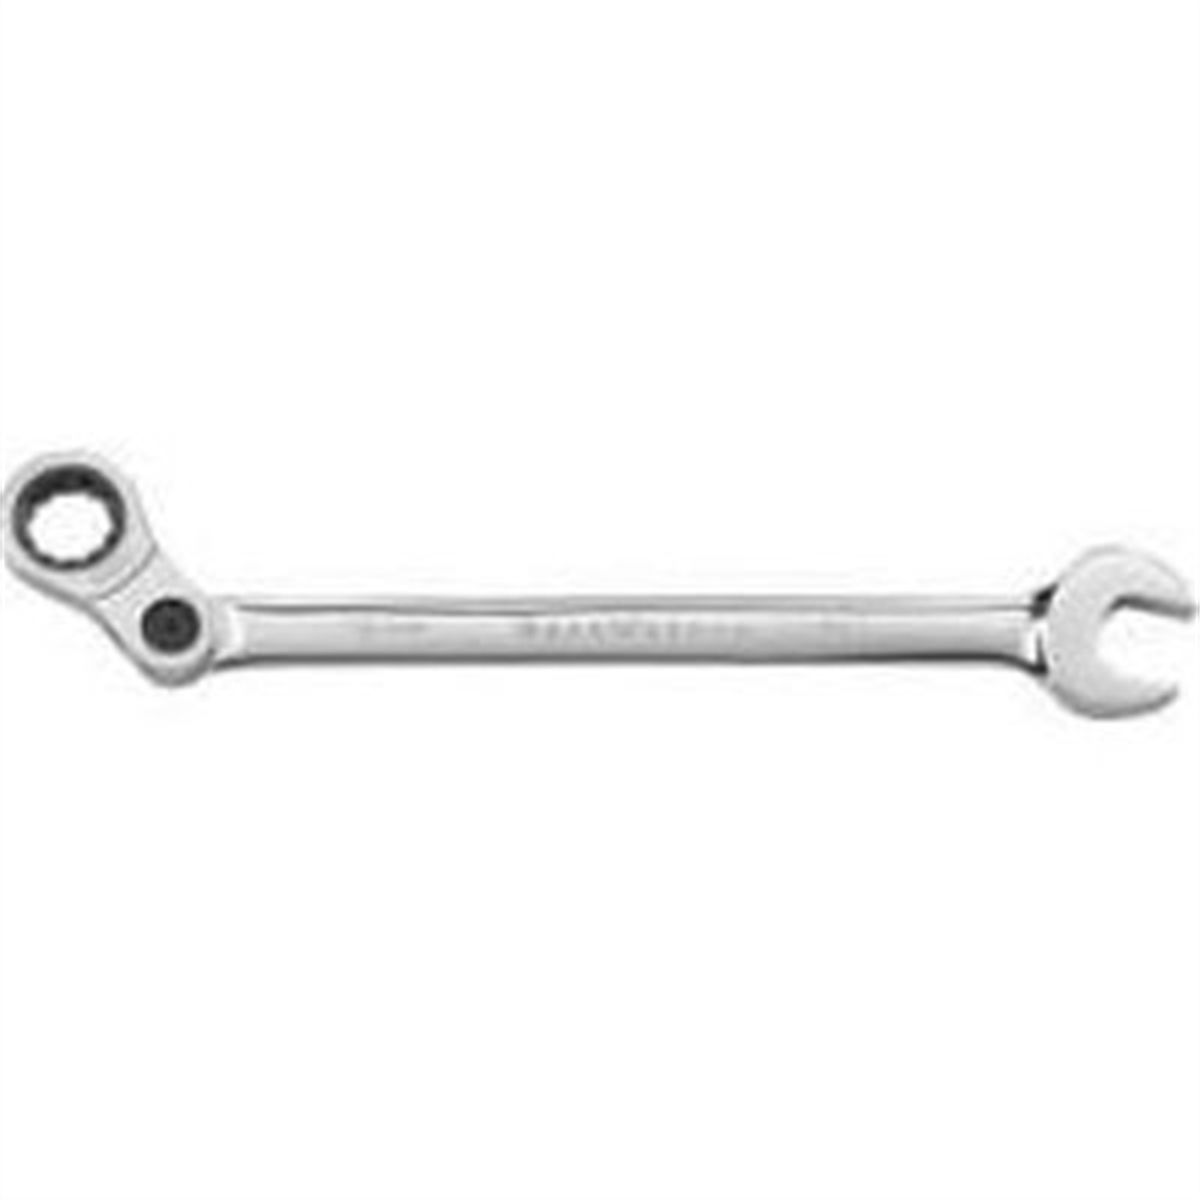 1/2" INDEXING COMBINATION WRENCH